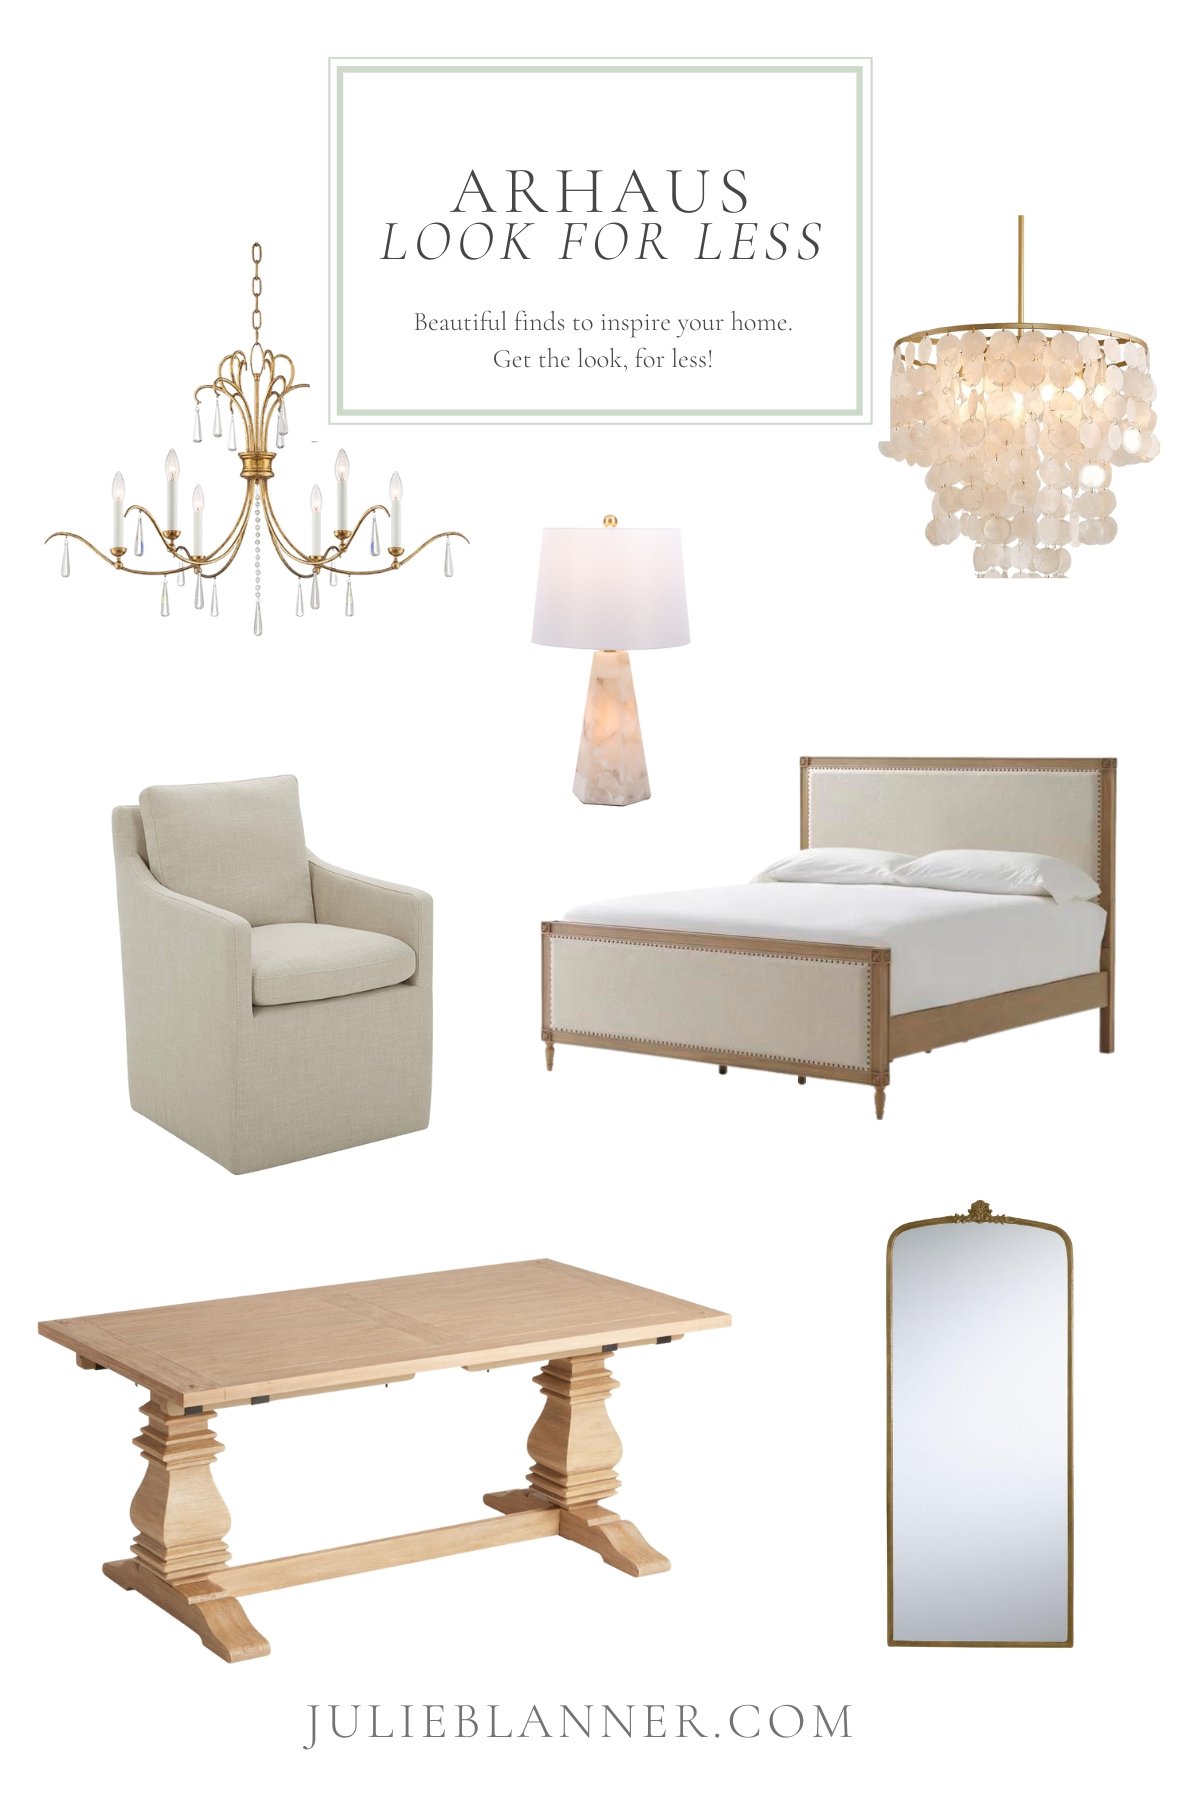 A collage of Arhaus look for less items.